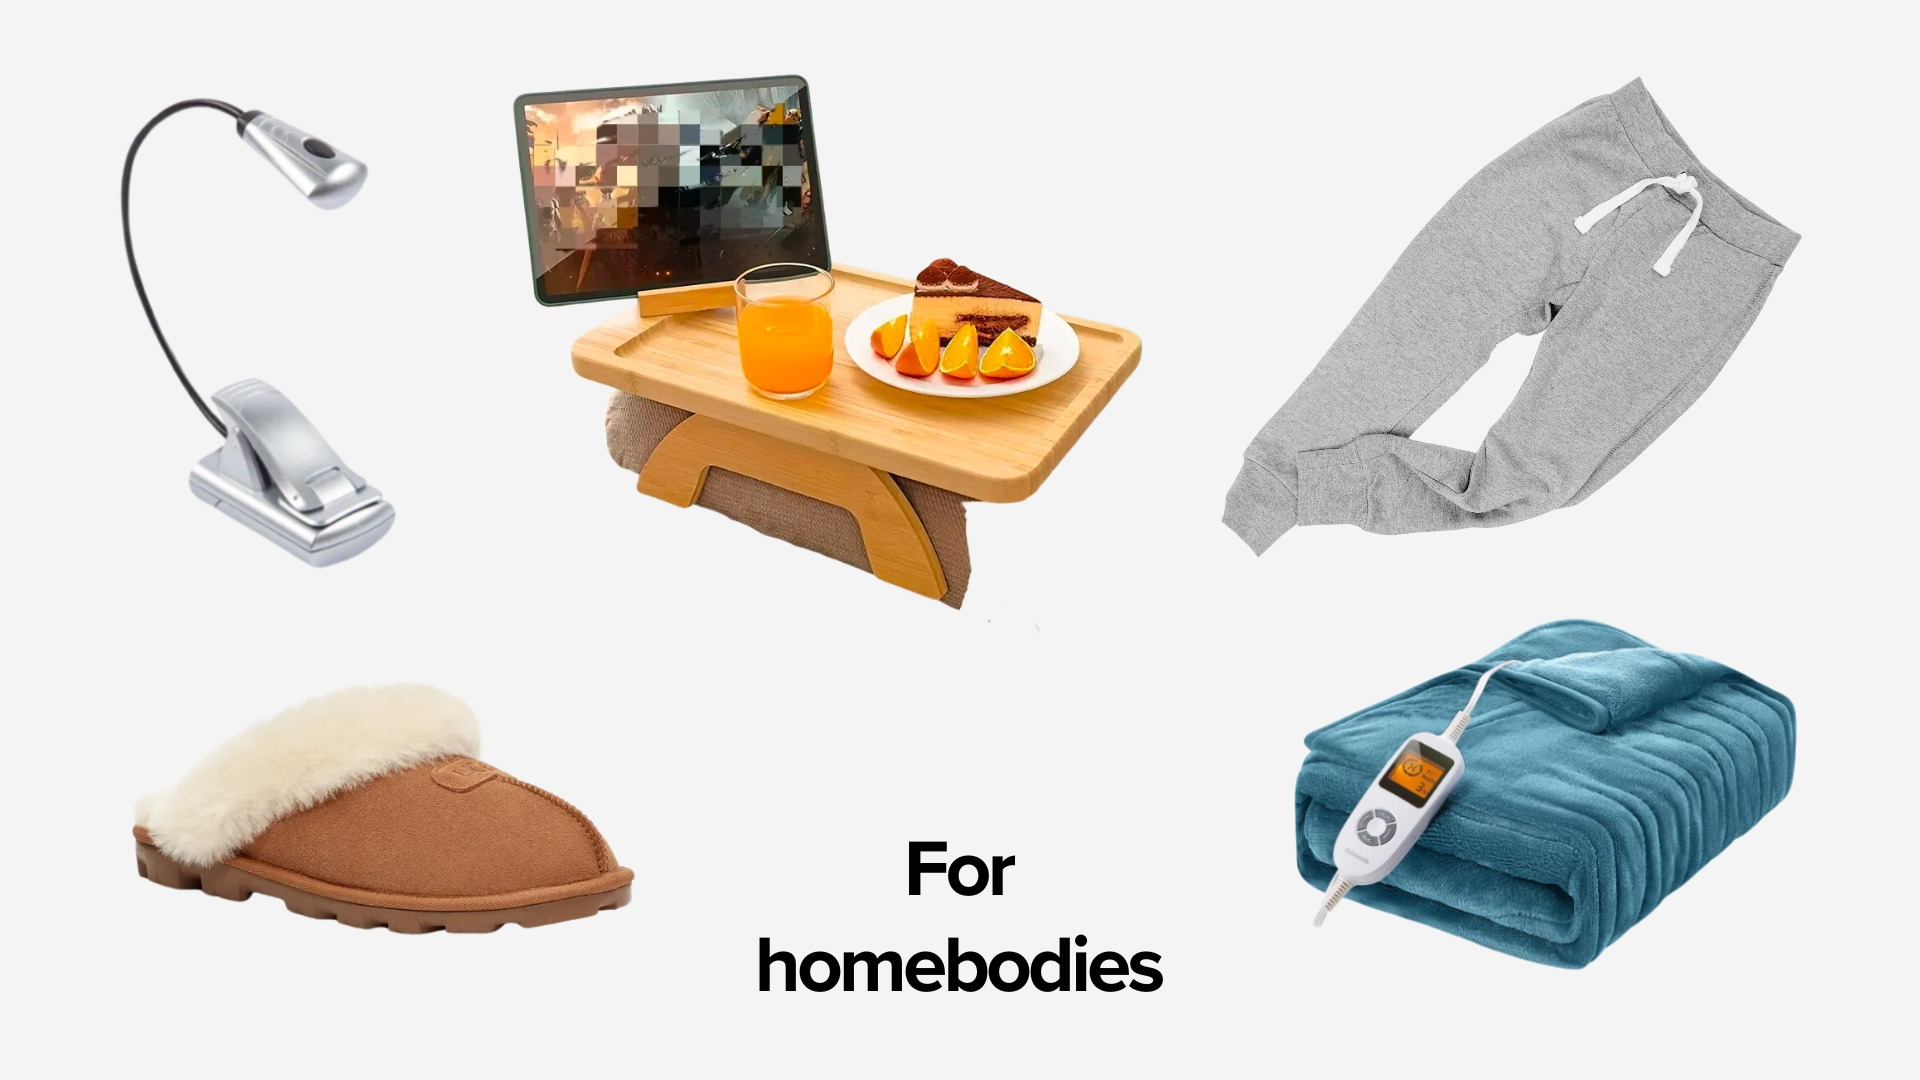 gift ideas for homebodies, for people who like to relax, comfy